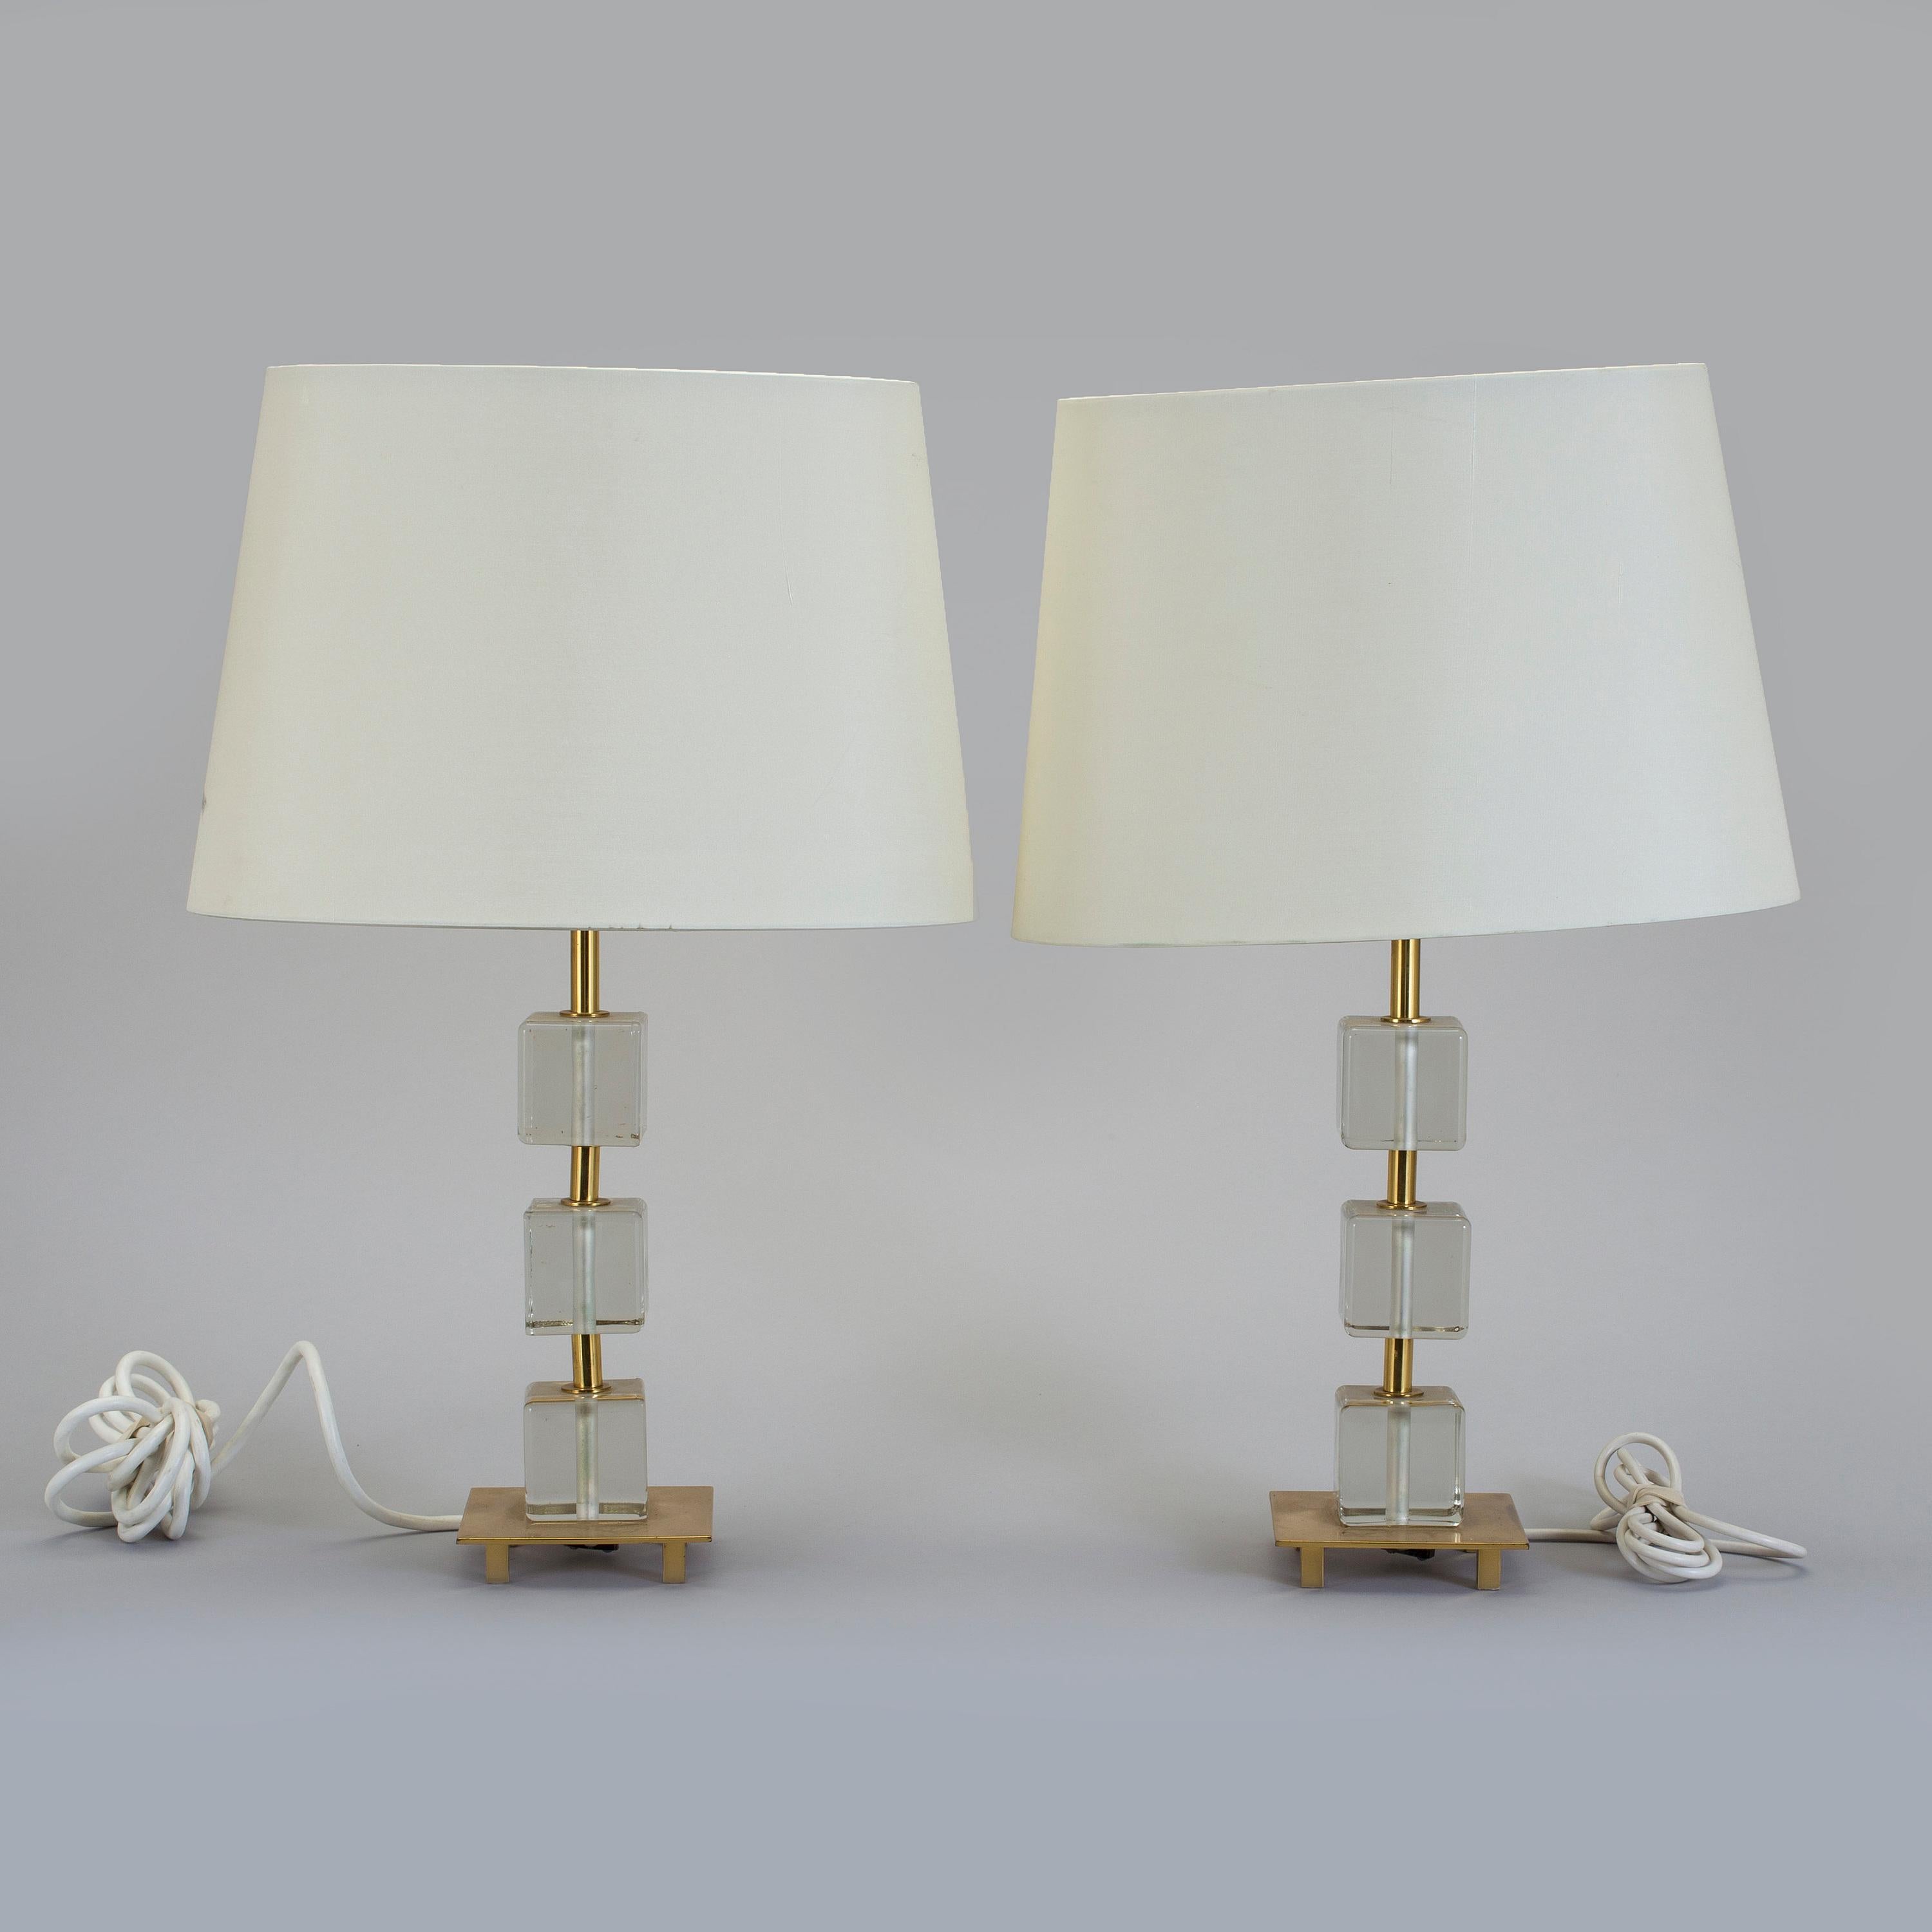 Swedish Glass and Brass Pair of Table Lamps by Malmo Metallvarufabrik, Sweden, 1960 For Sale